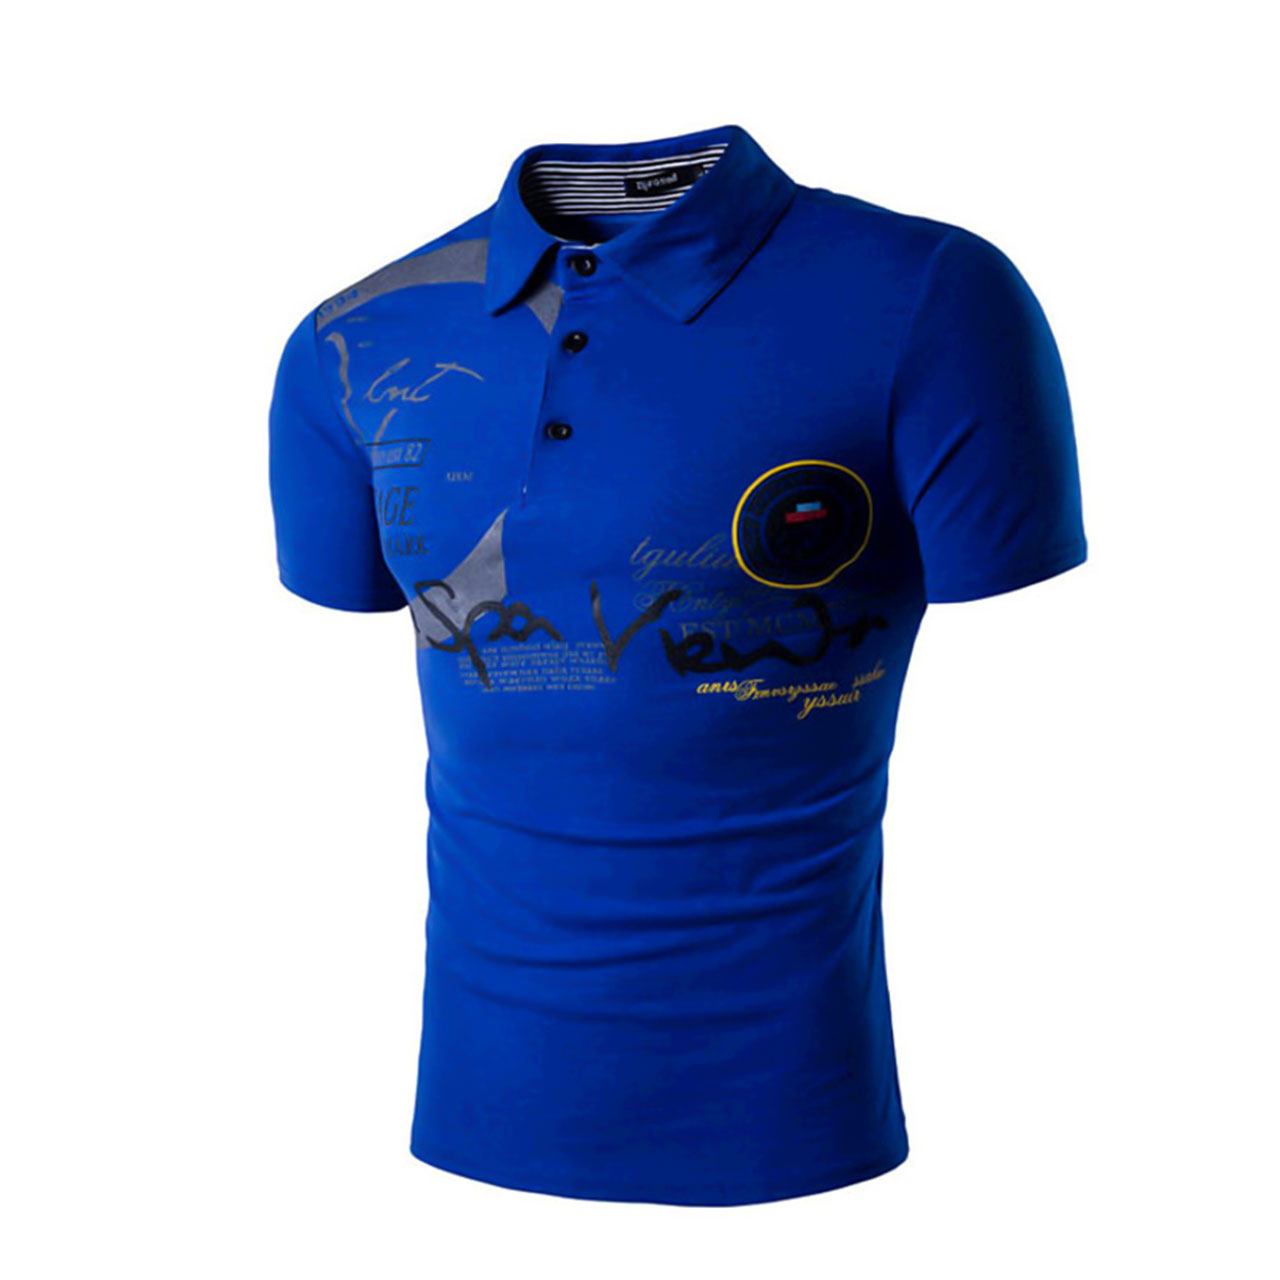 Men's Active Sports Going Out Weekend Summer Short Sleeve Royal Blue Polo Shirt With Collar